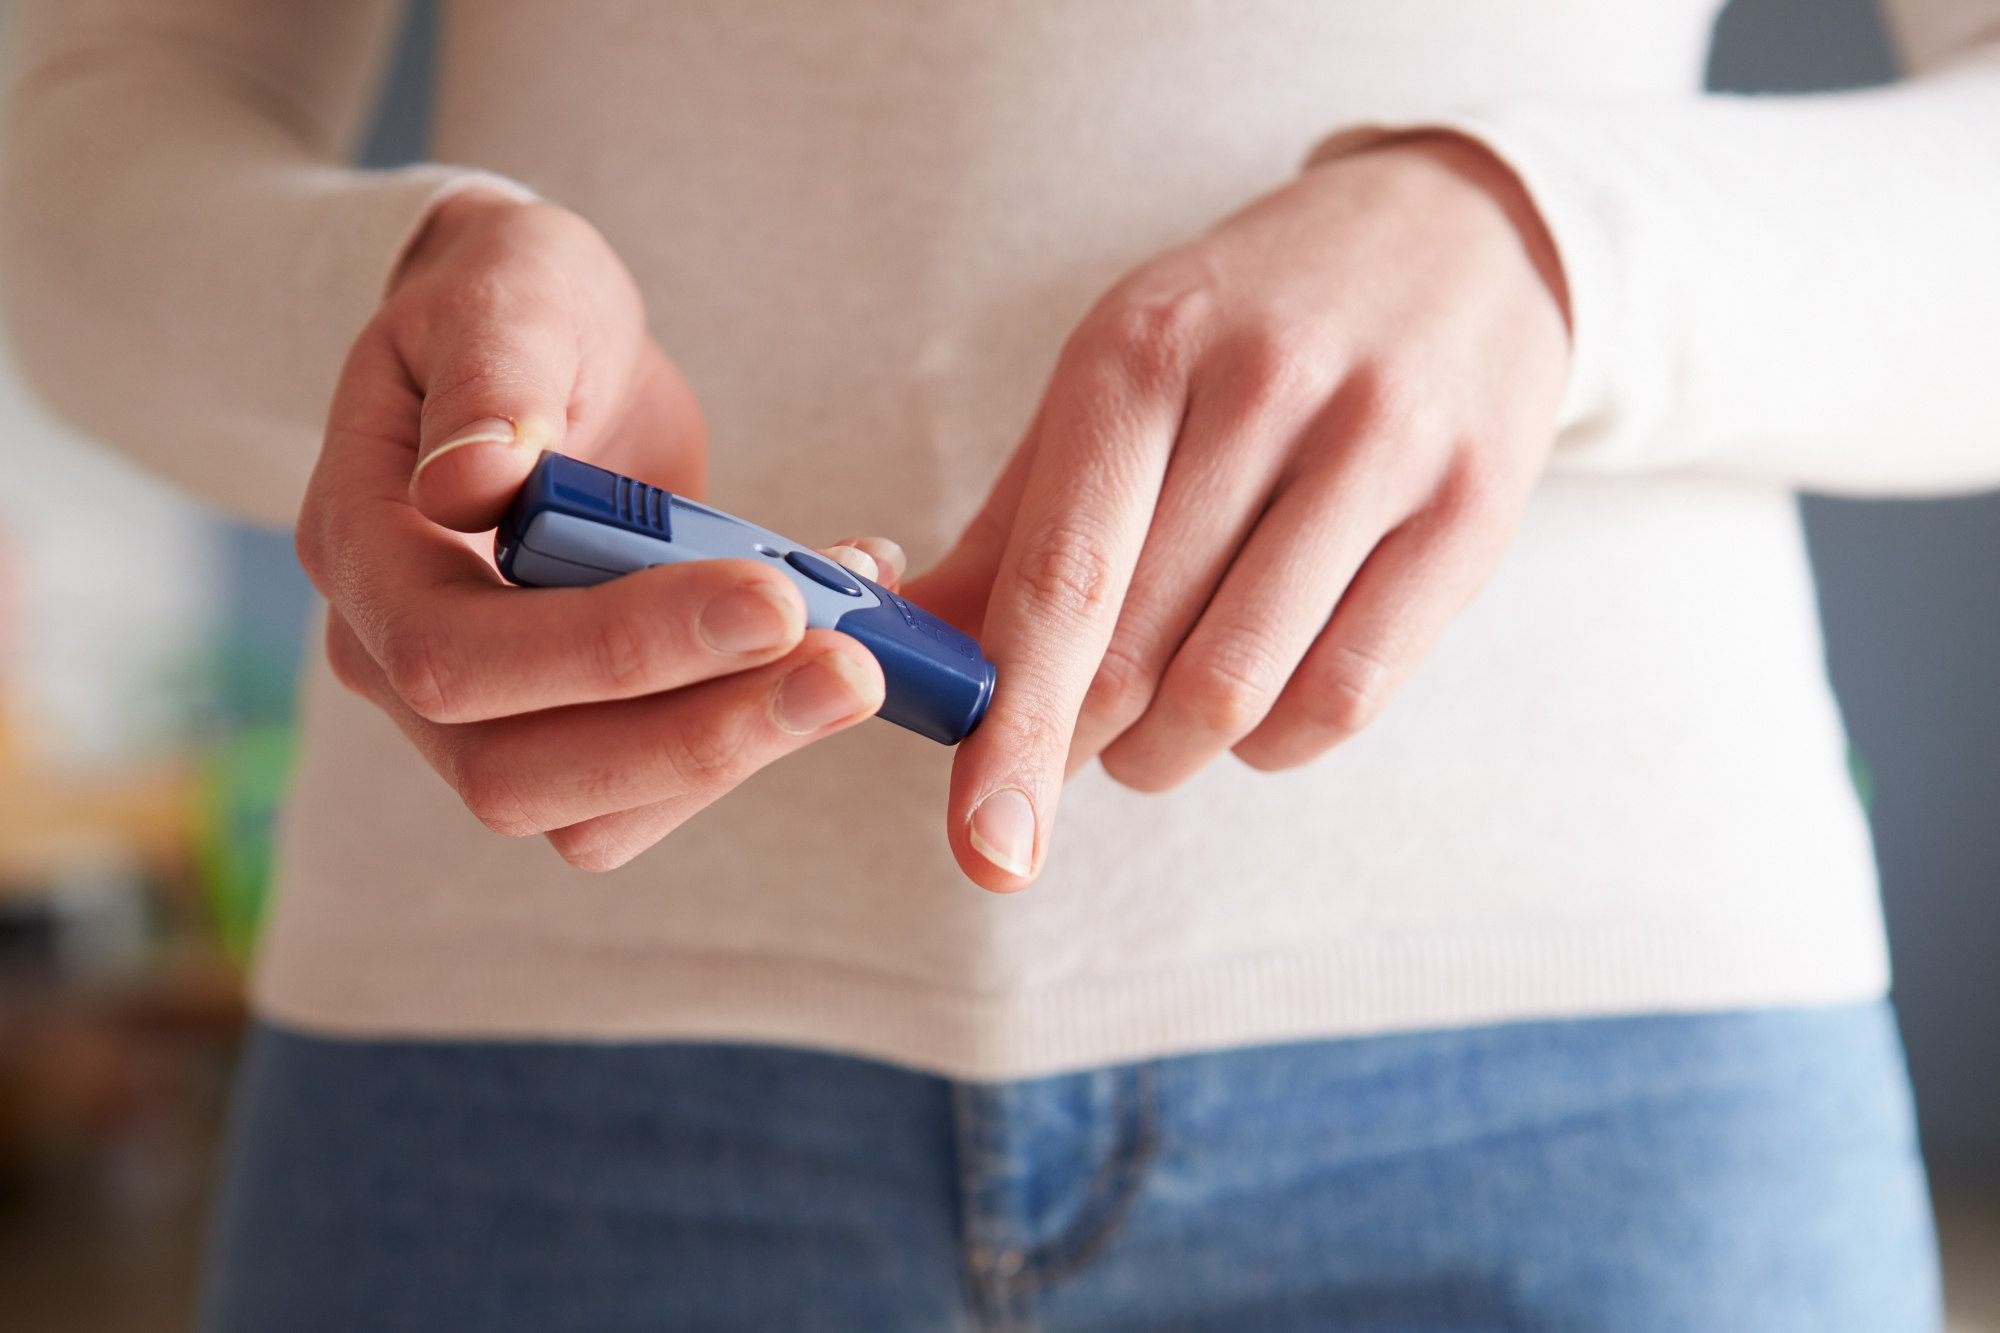 Why Is Low Blood Sugar So Dangerous for People With Diabetes?